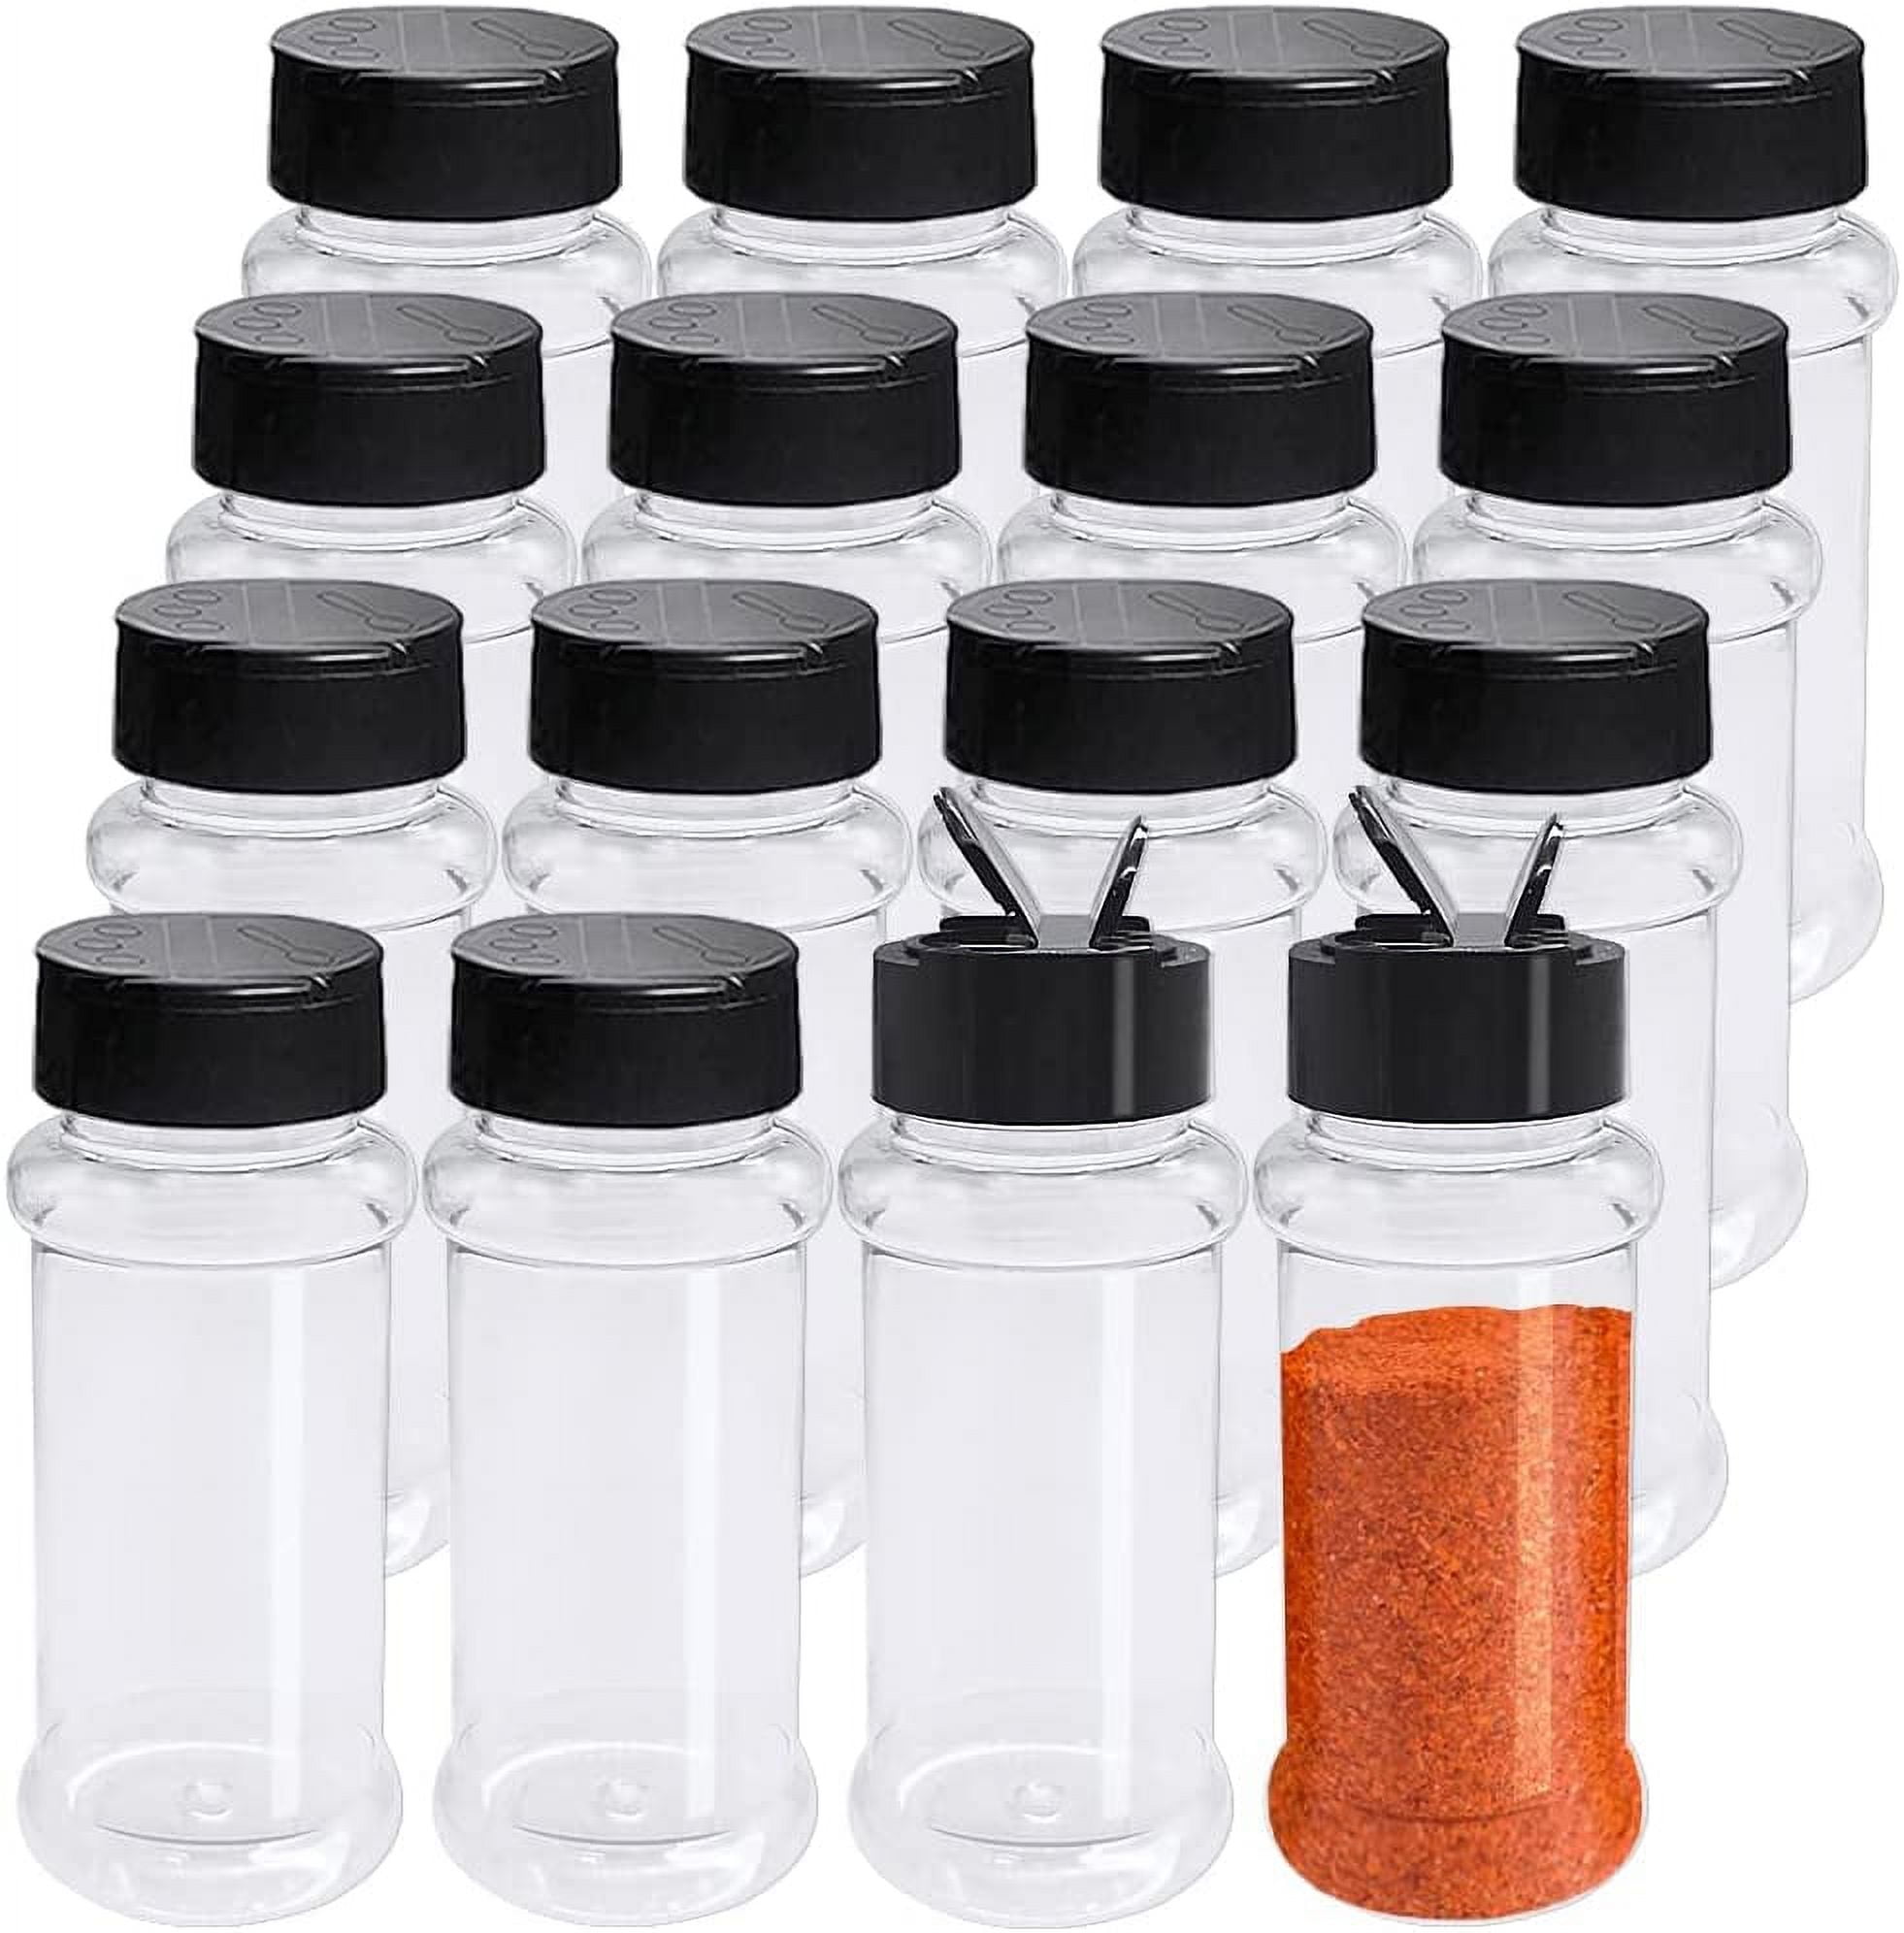 AISIPRIN 24 Pcs Glass Spice Jars with 398 Labels, 4oz Empty Square  Containers Seasoning Bottles - Shaker Lids, Funnel, Brush and Marker  Included(Black